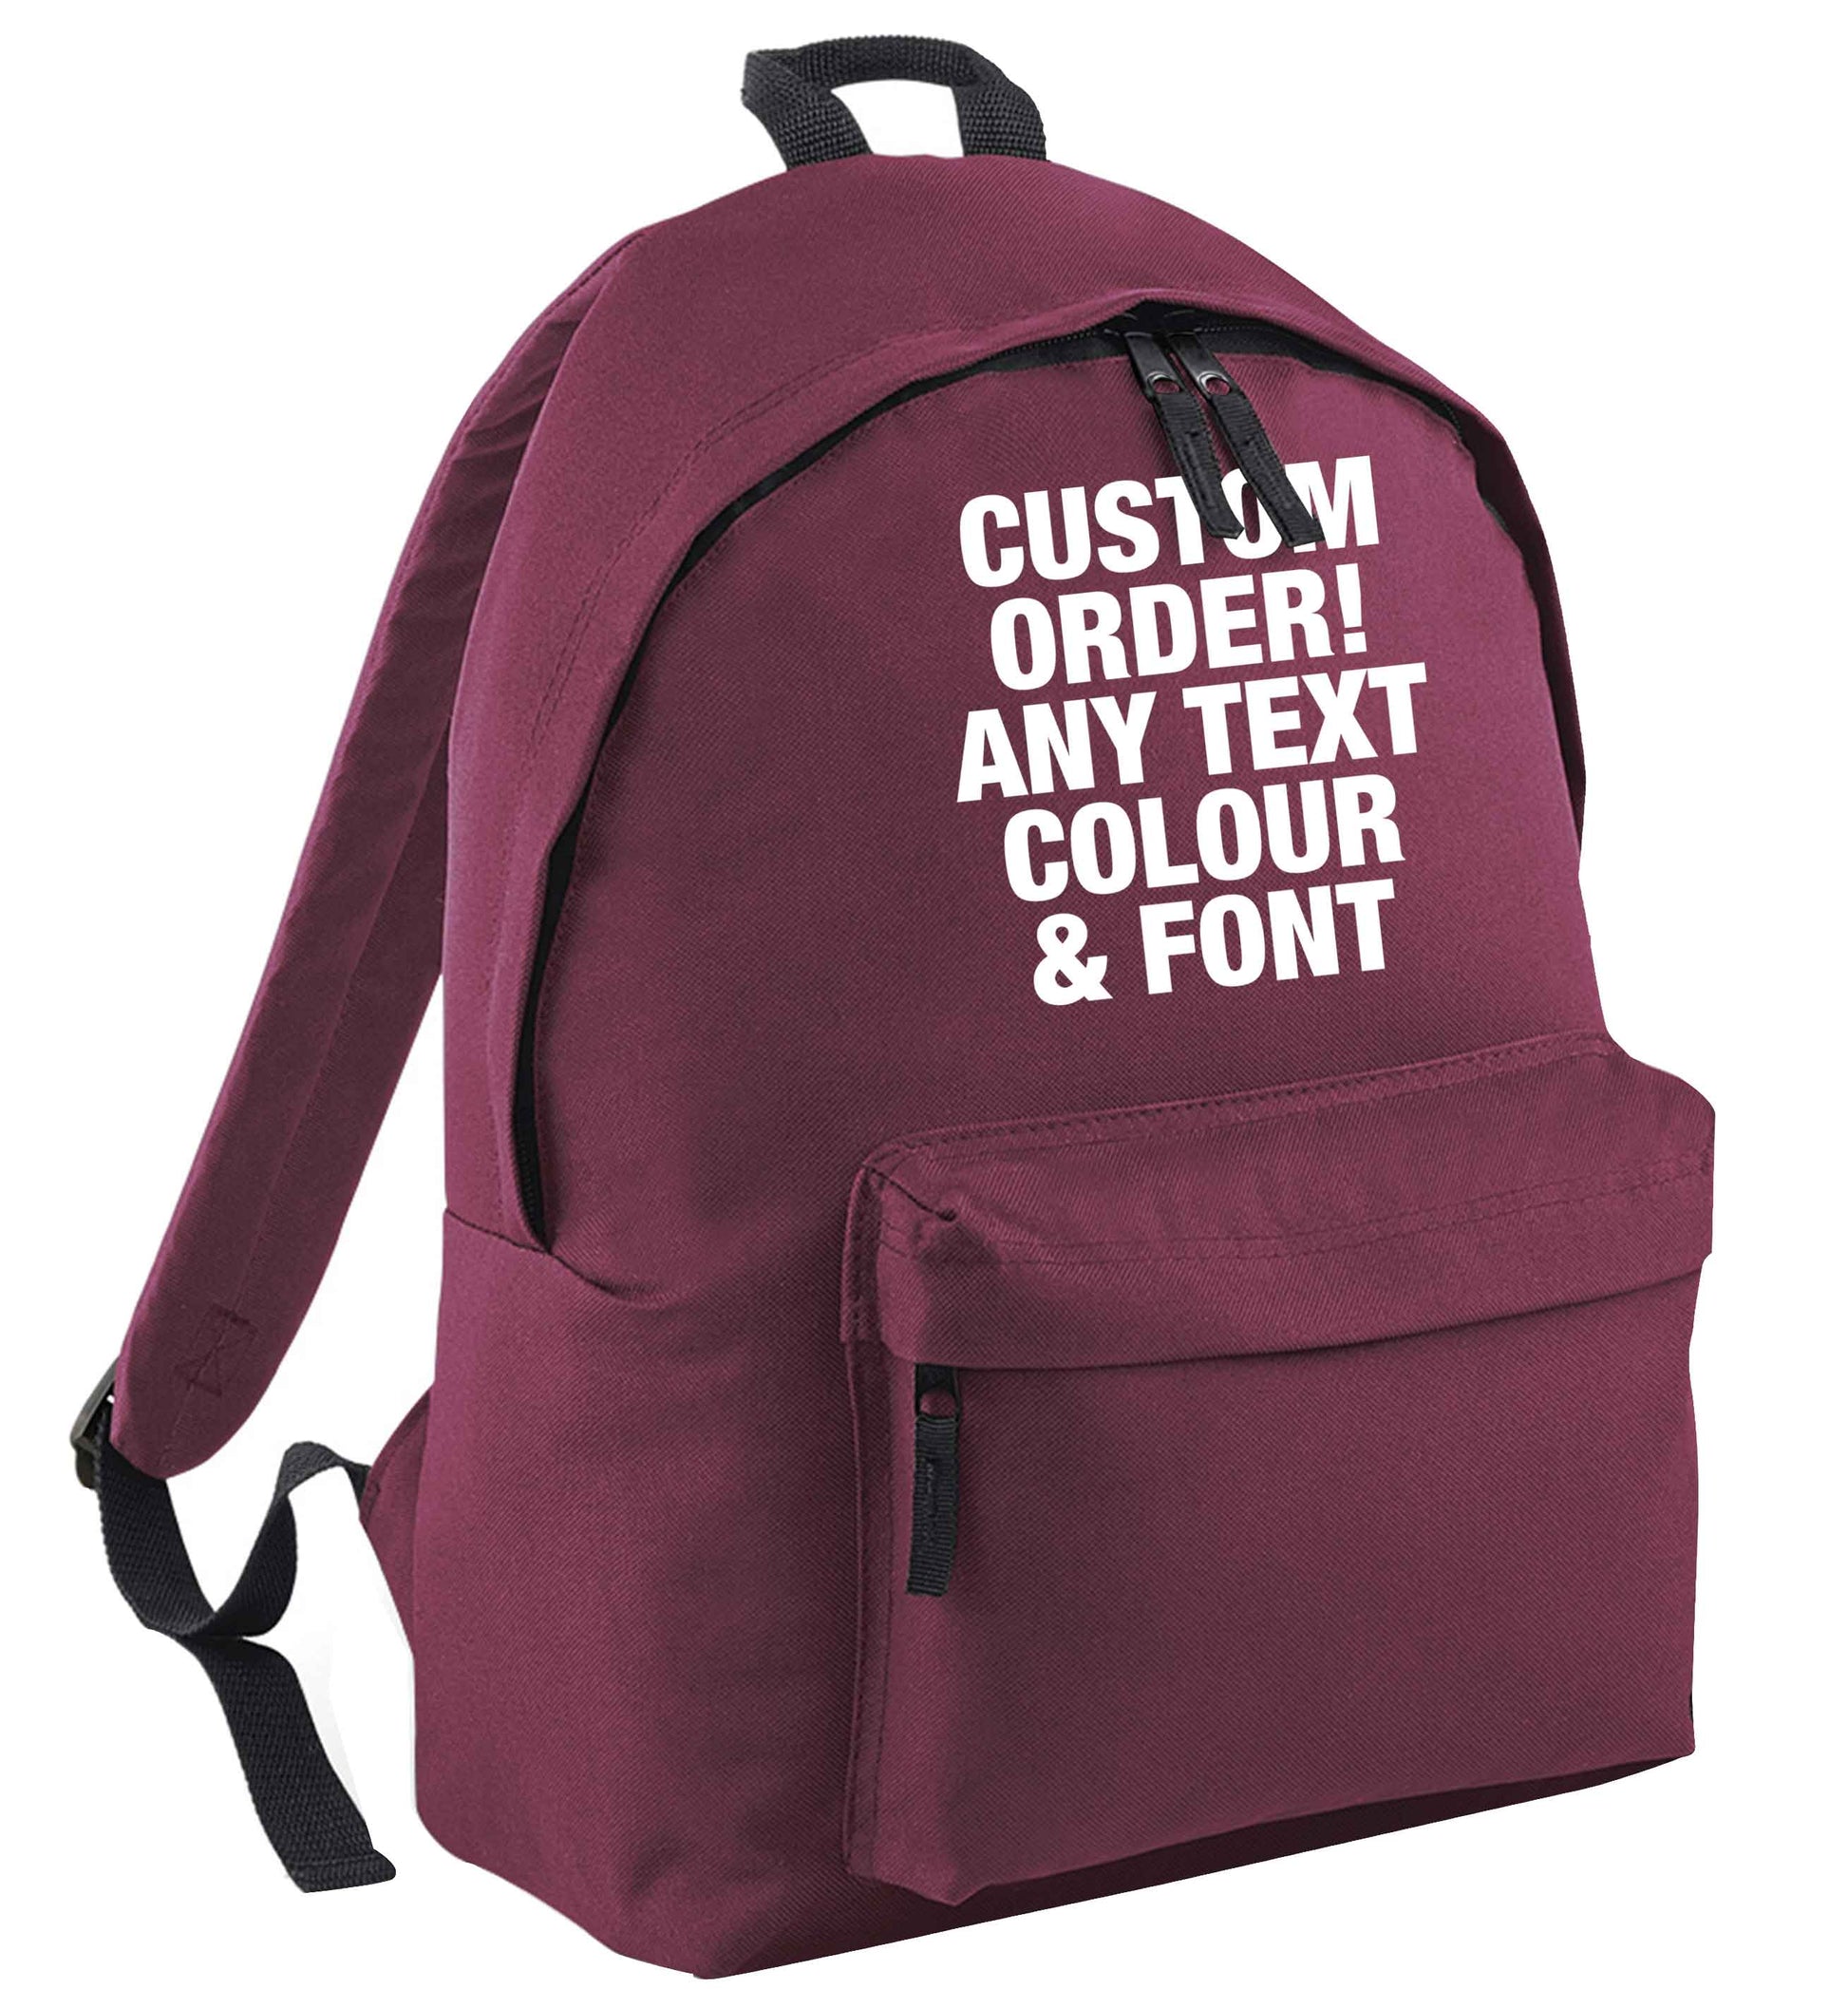 Custom order any text colour and font maroon adults backpack